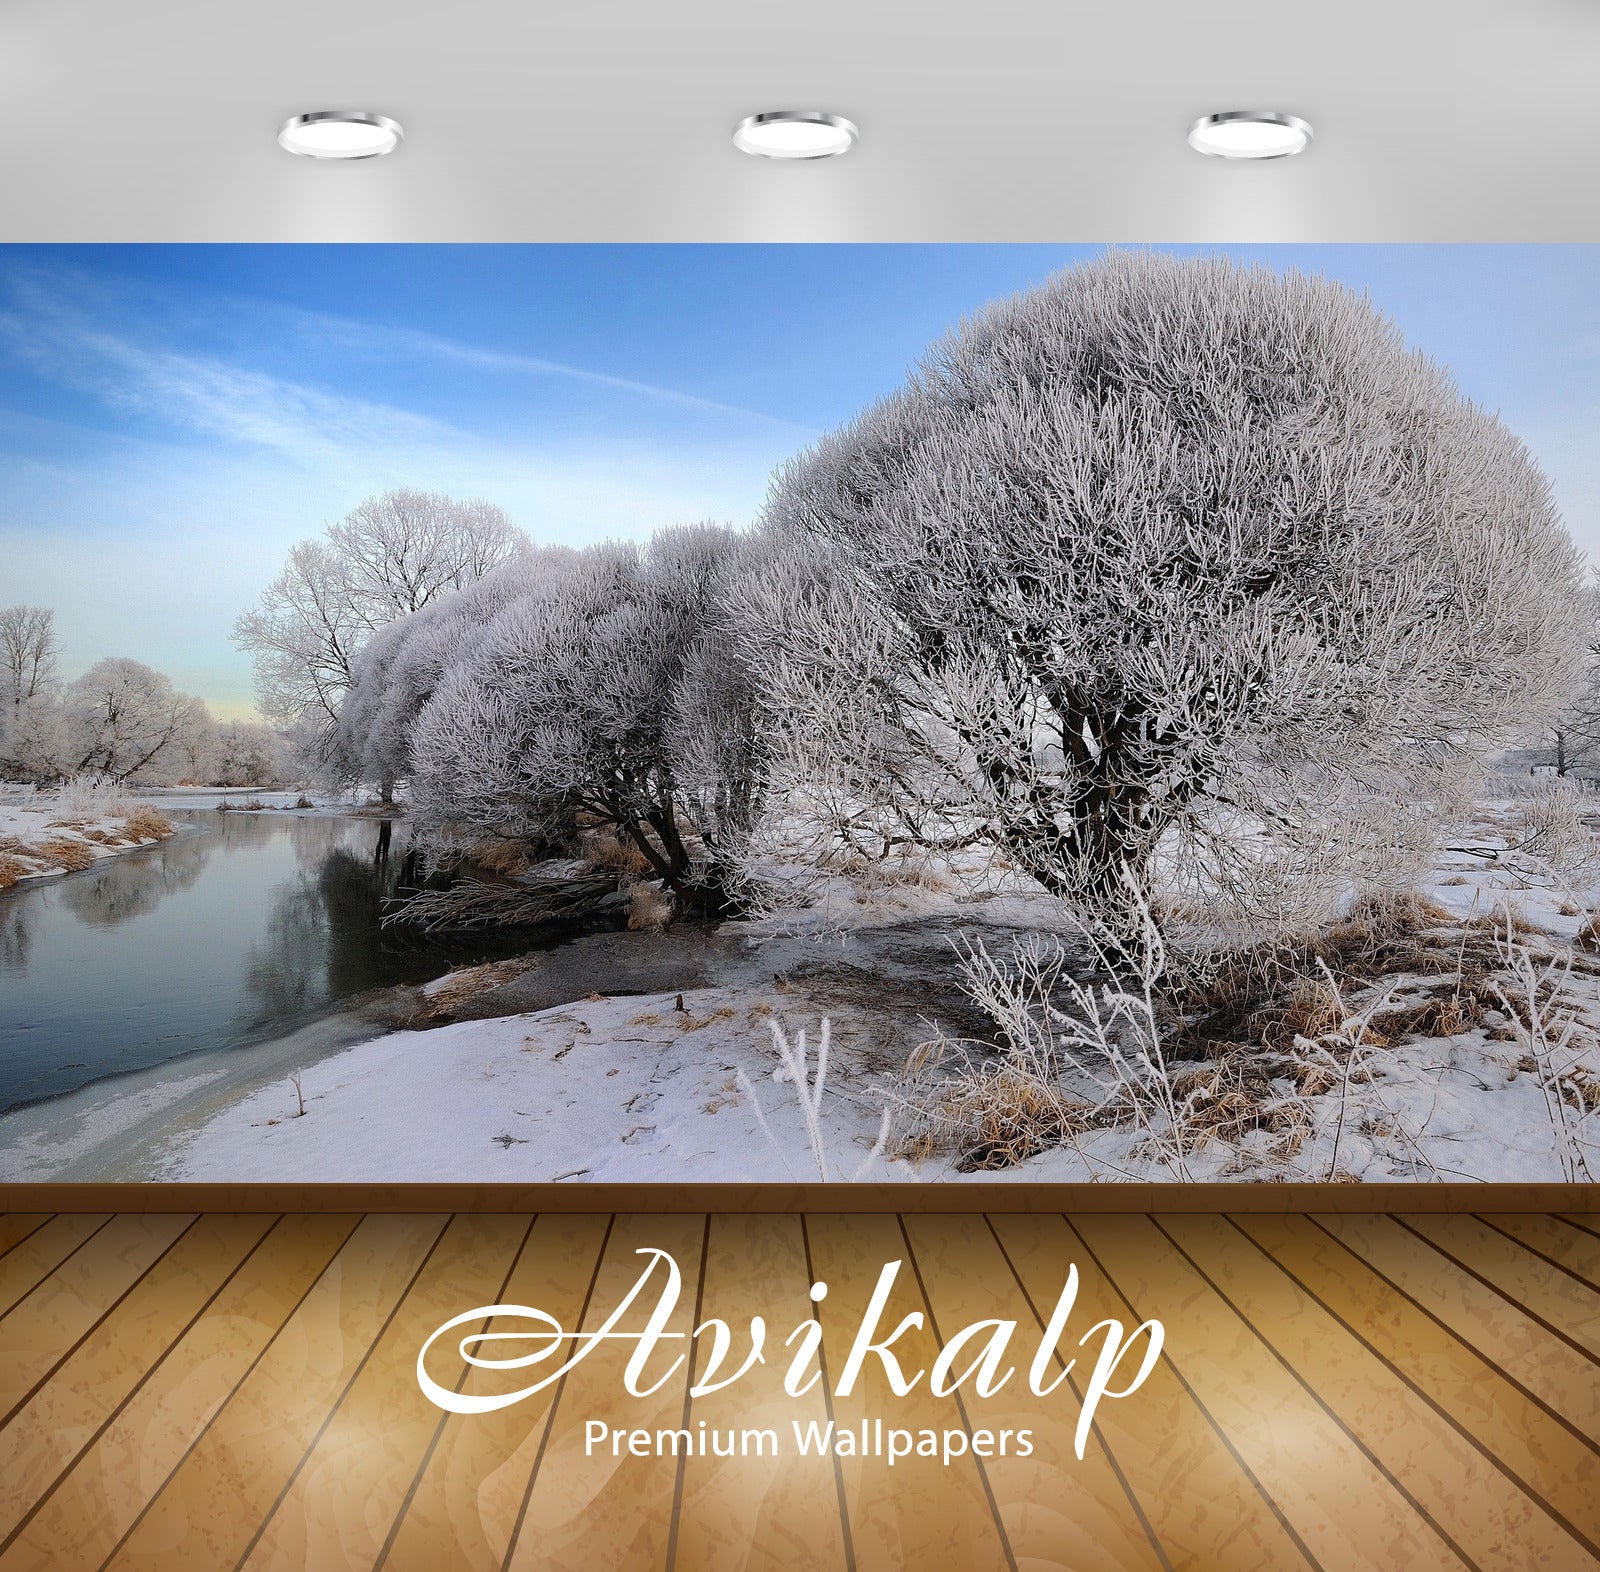 Avikalp Exclusive Awi6330 Snowy Trees By The River Nature Full HD Wallpapers for Living room, Hall,